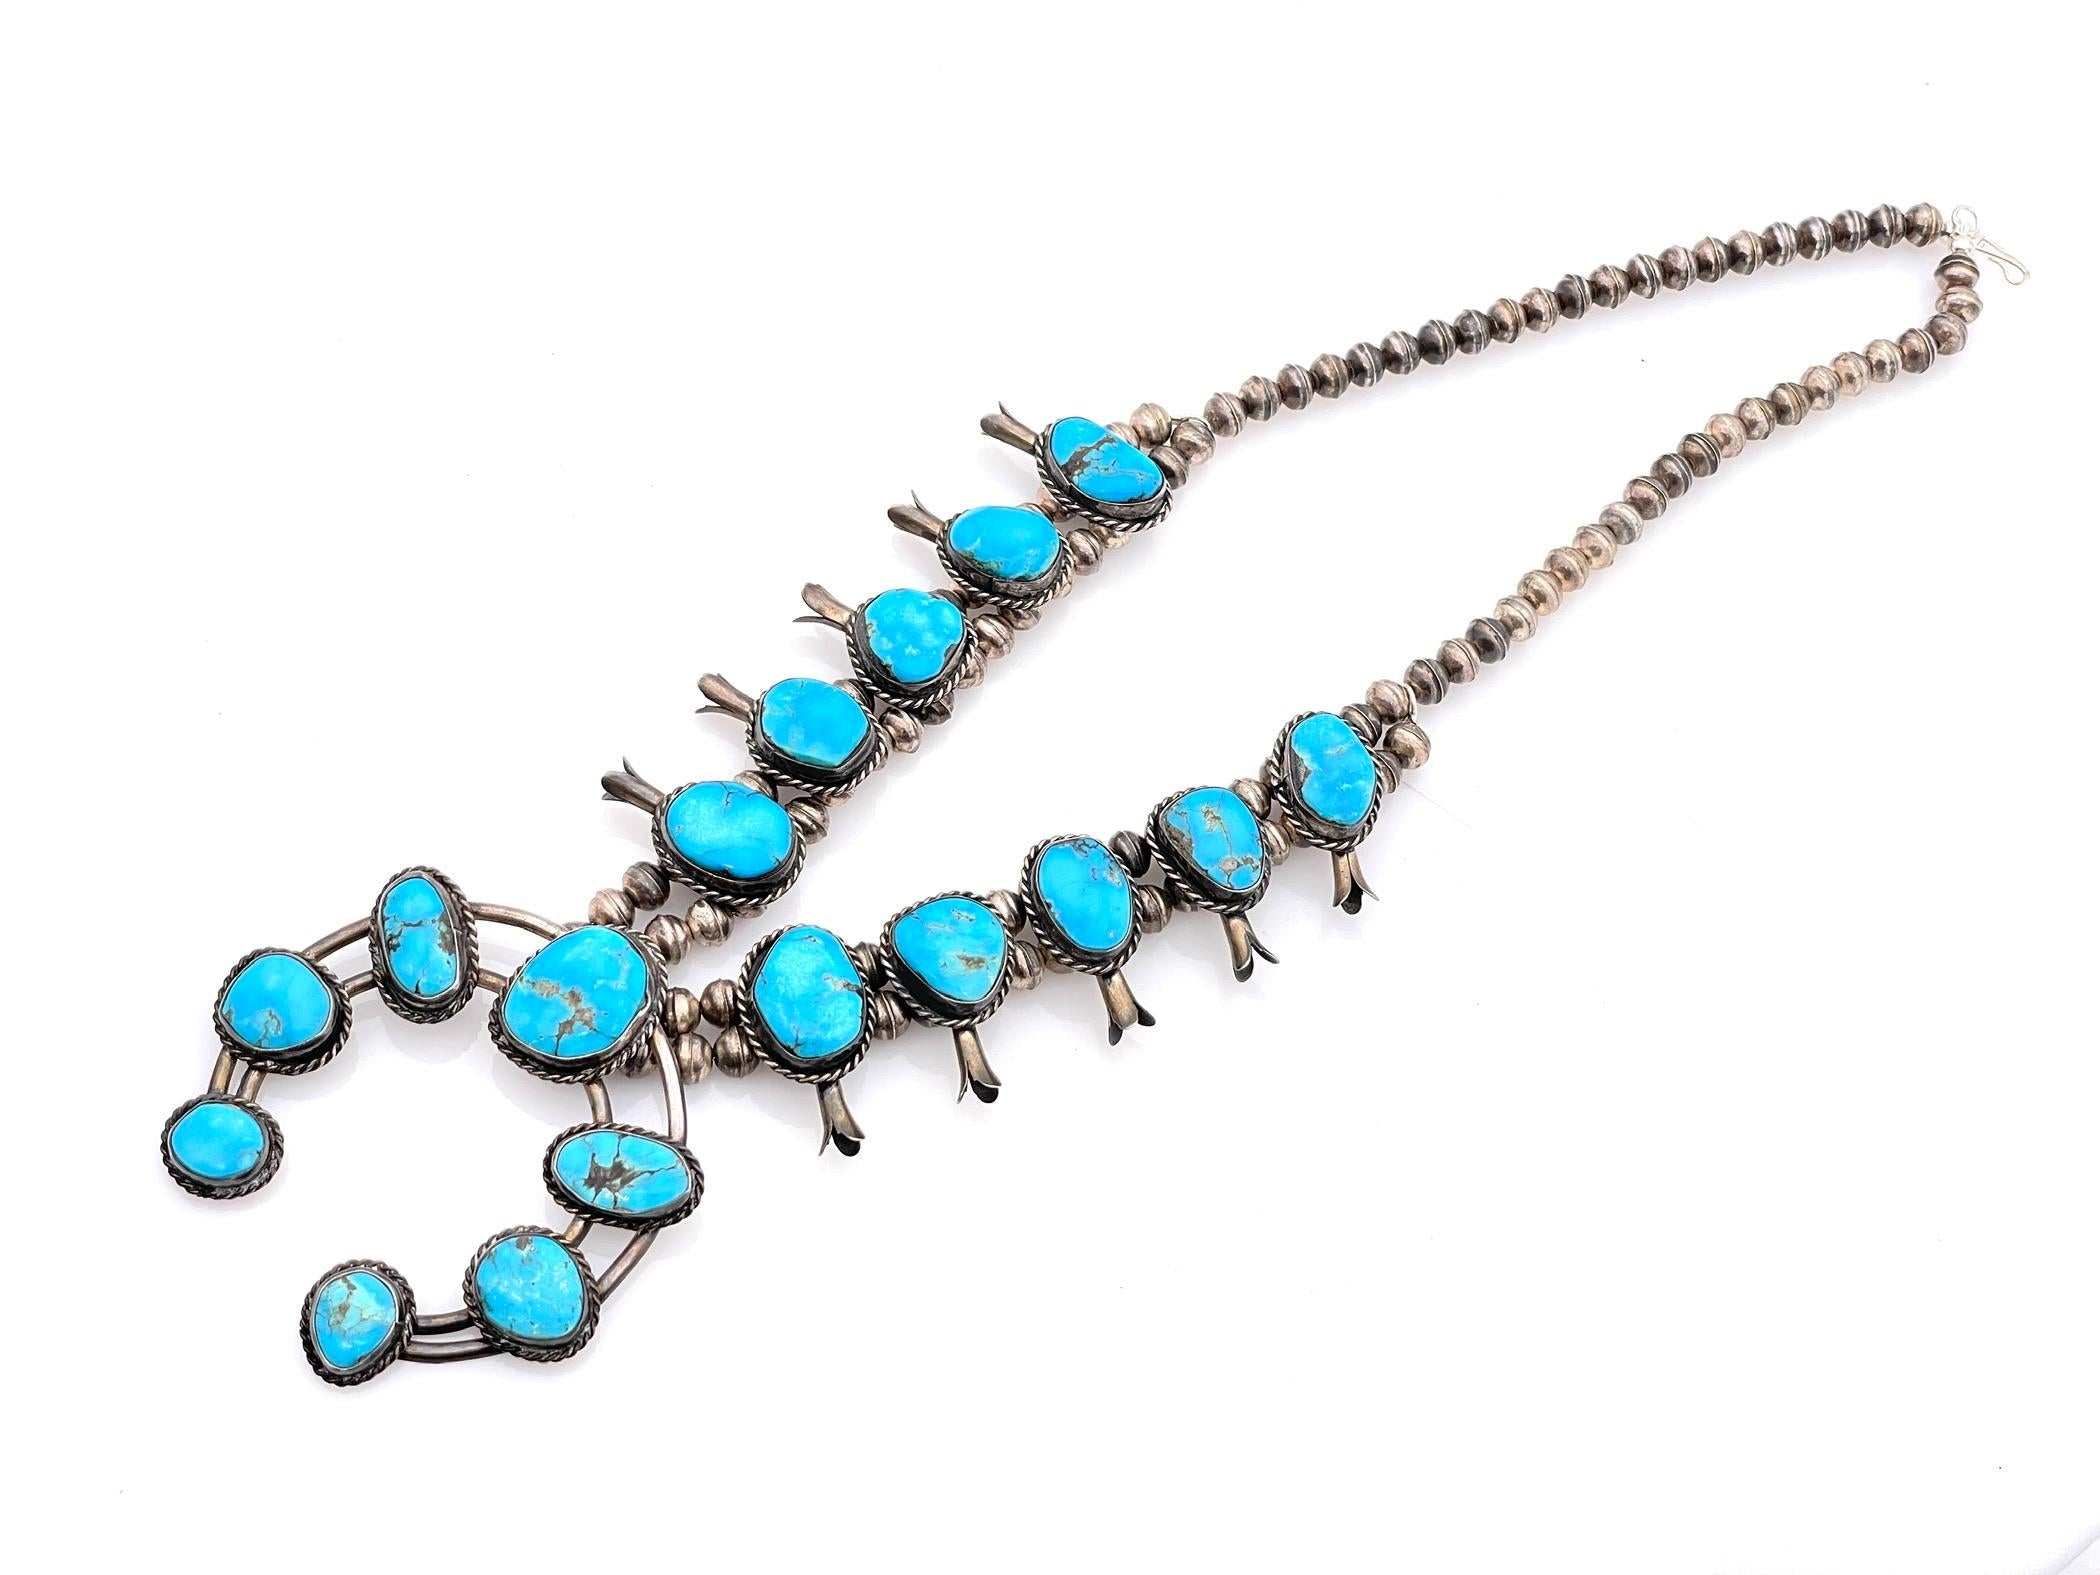 Navajo Squash Blossom Necklace | Perry Null Trading – Perry Null Trading Co